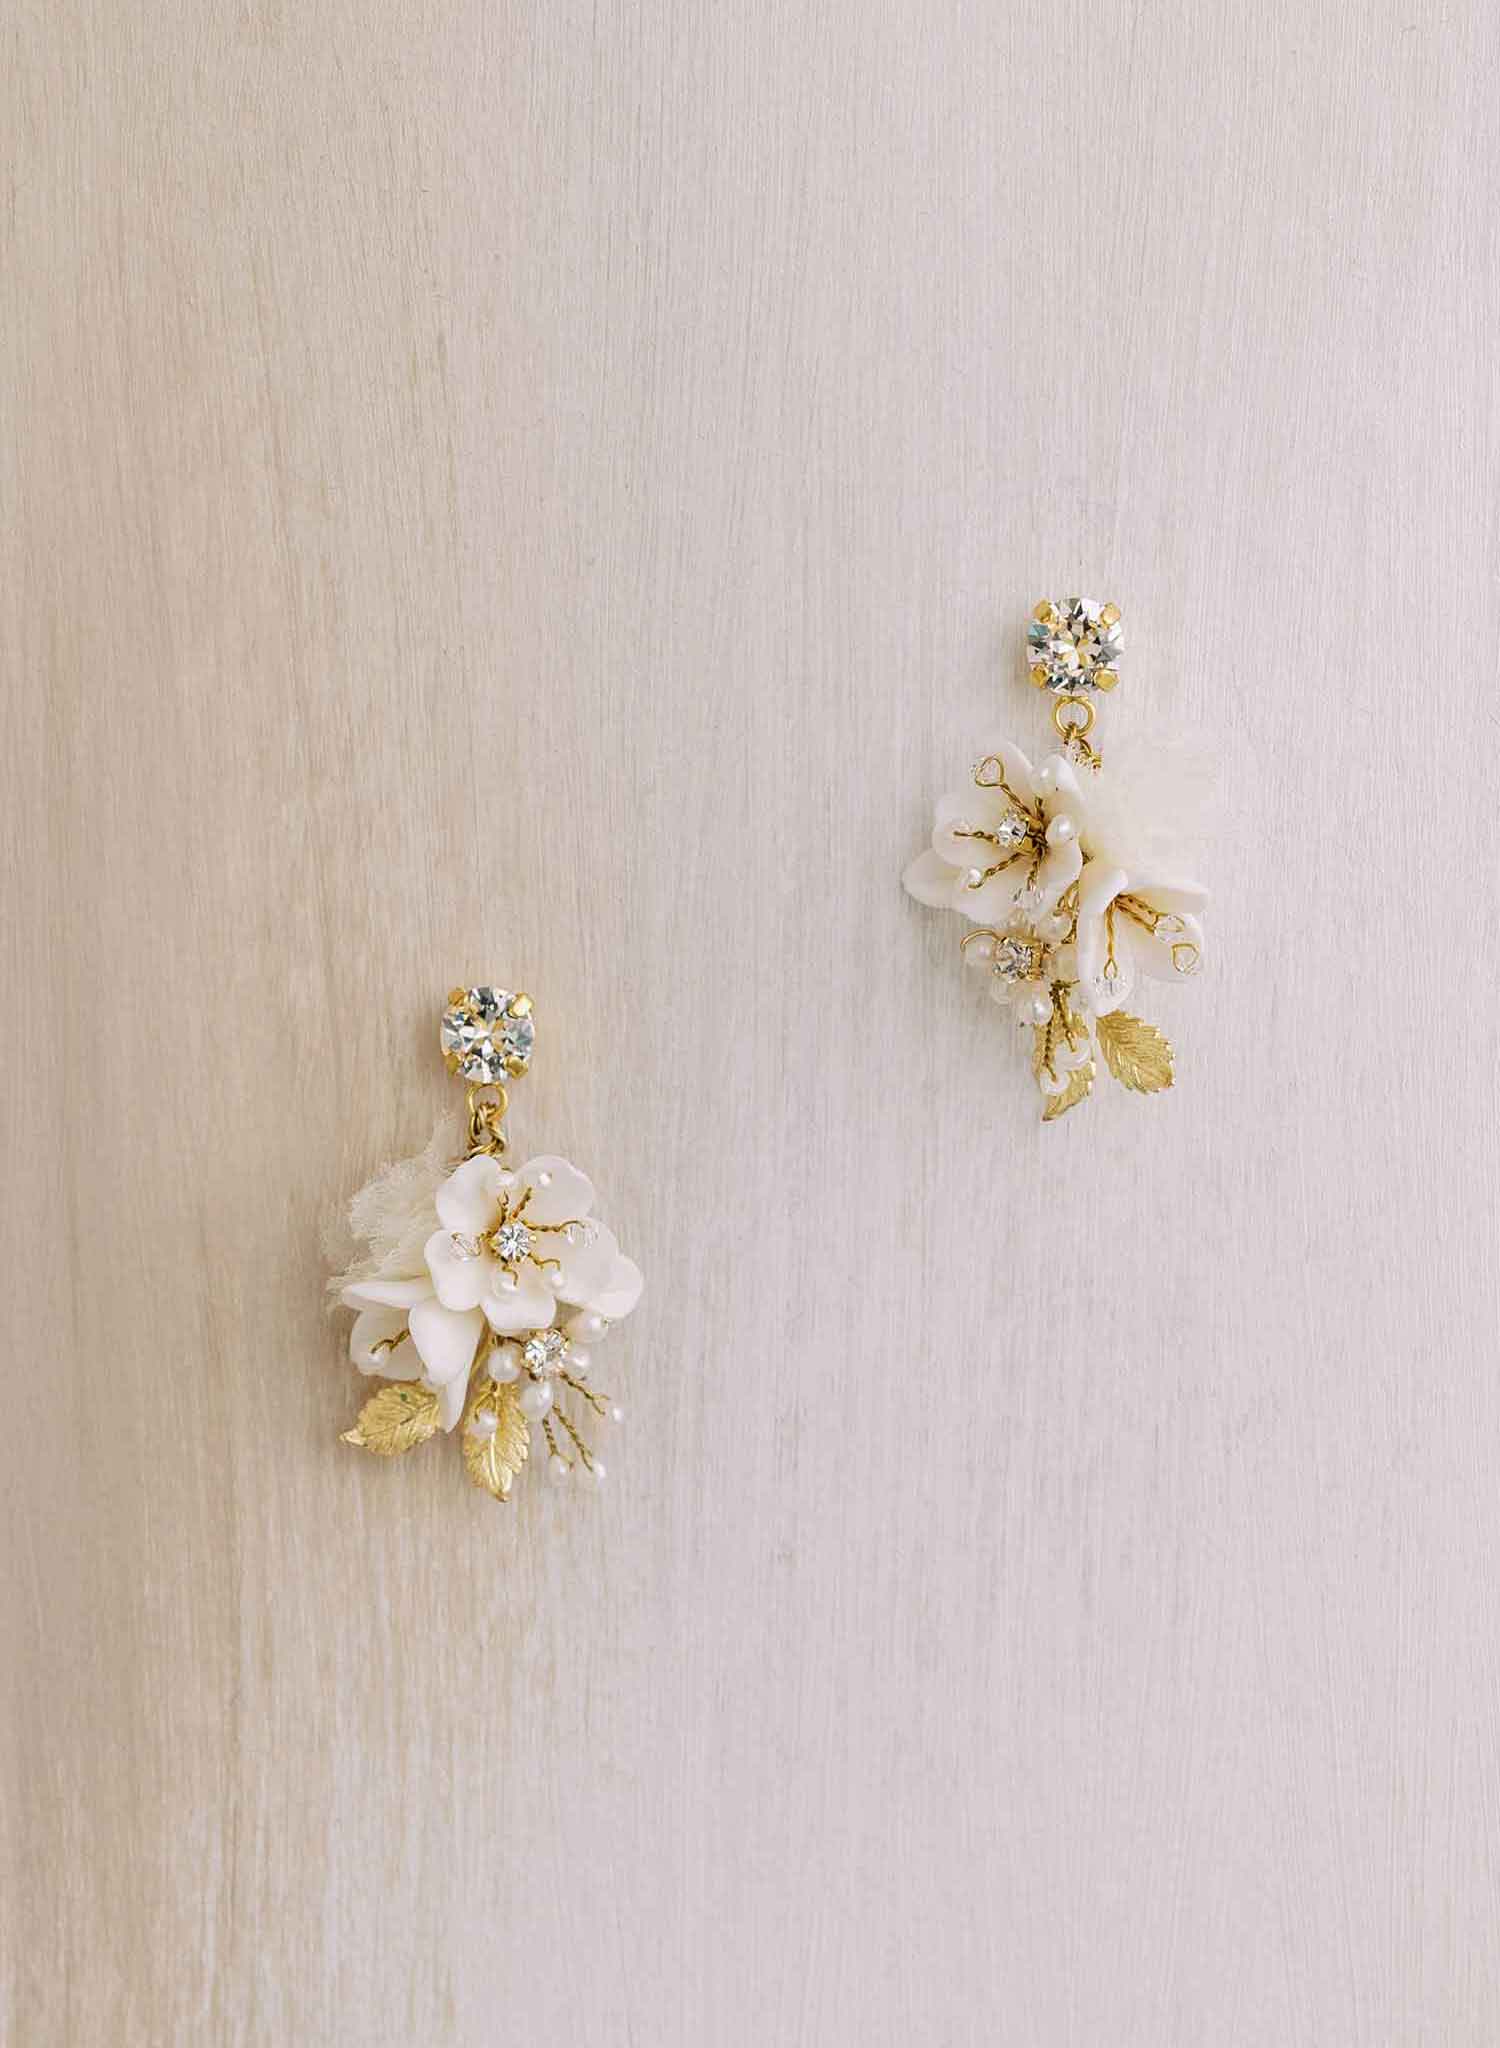 Petite floral and crystal bridal earrings - Style #2100